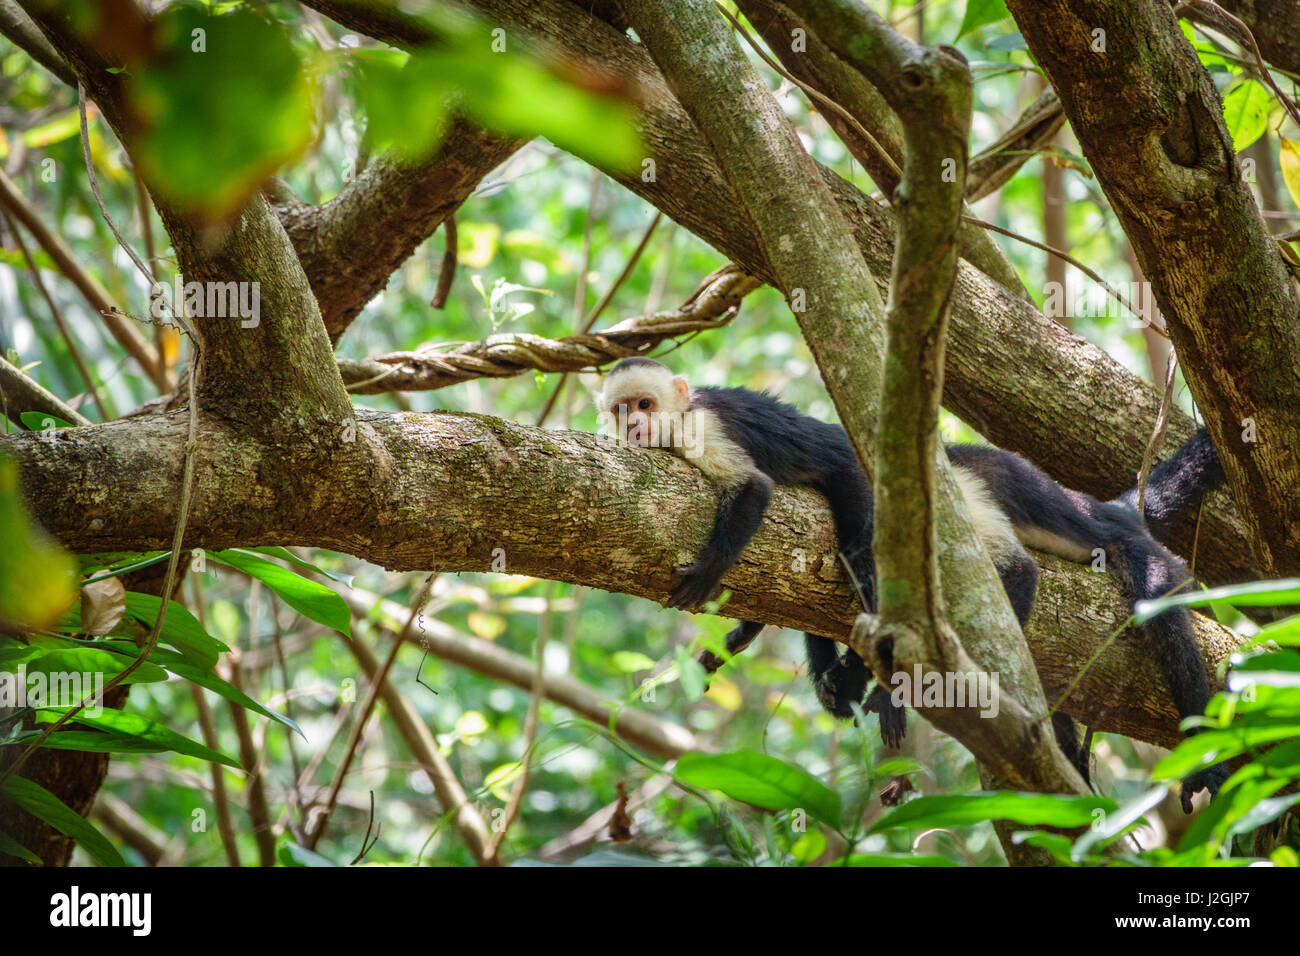 A pair of white faced capuchins on a branch, Costa Rica. Stock Photo